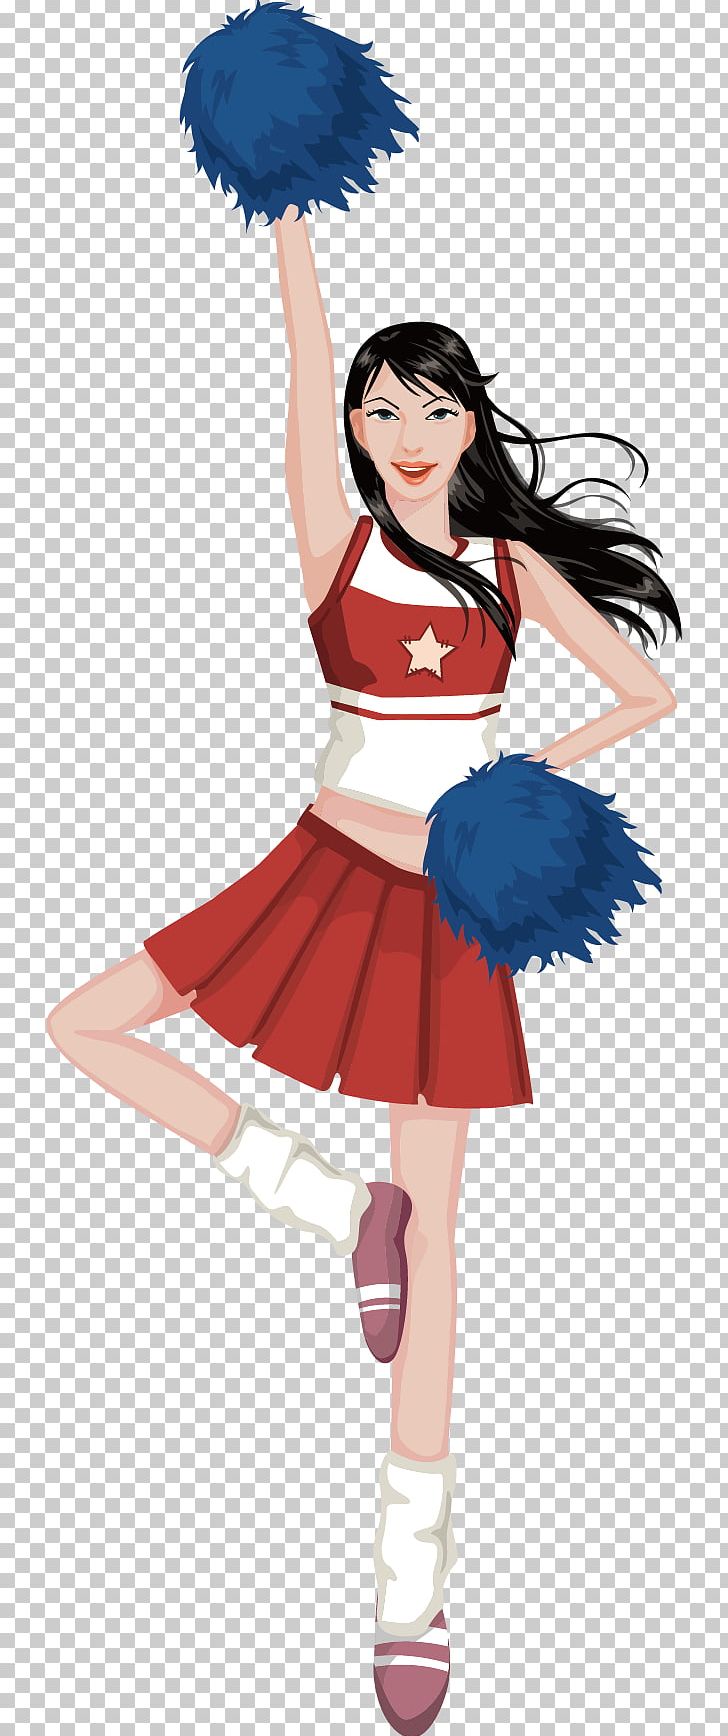 Cheerleader Illustration PNG, Clipart, Animals, Animation, Anime, Anime Beauty, Cartoon Free PNG Download